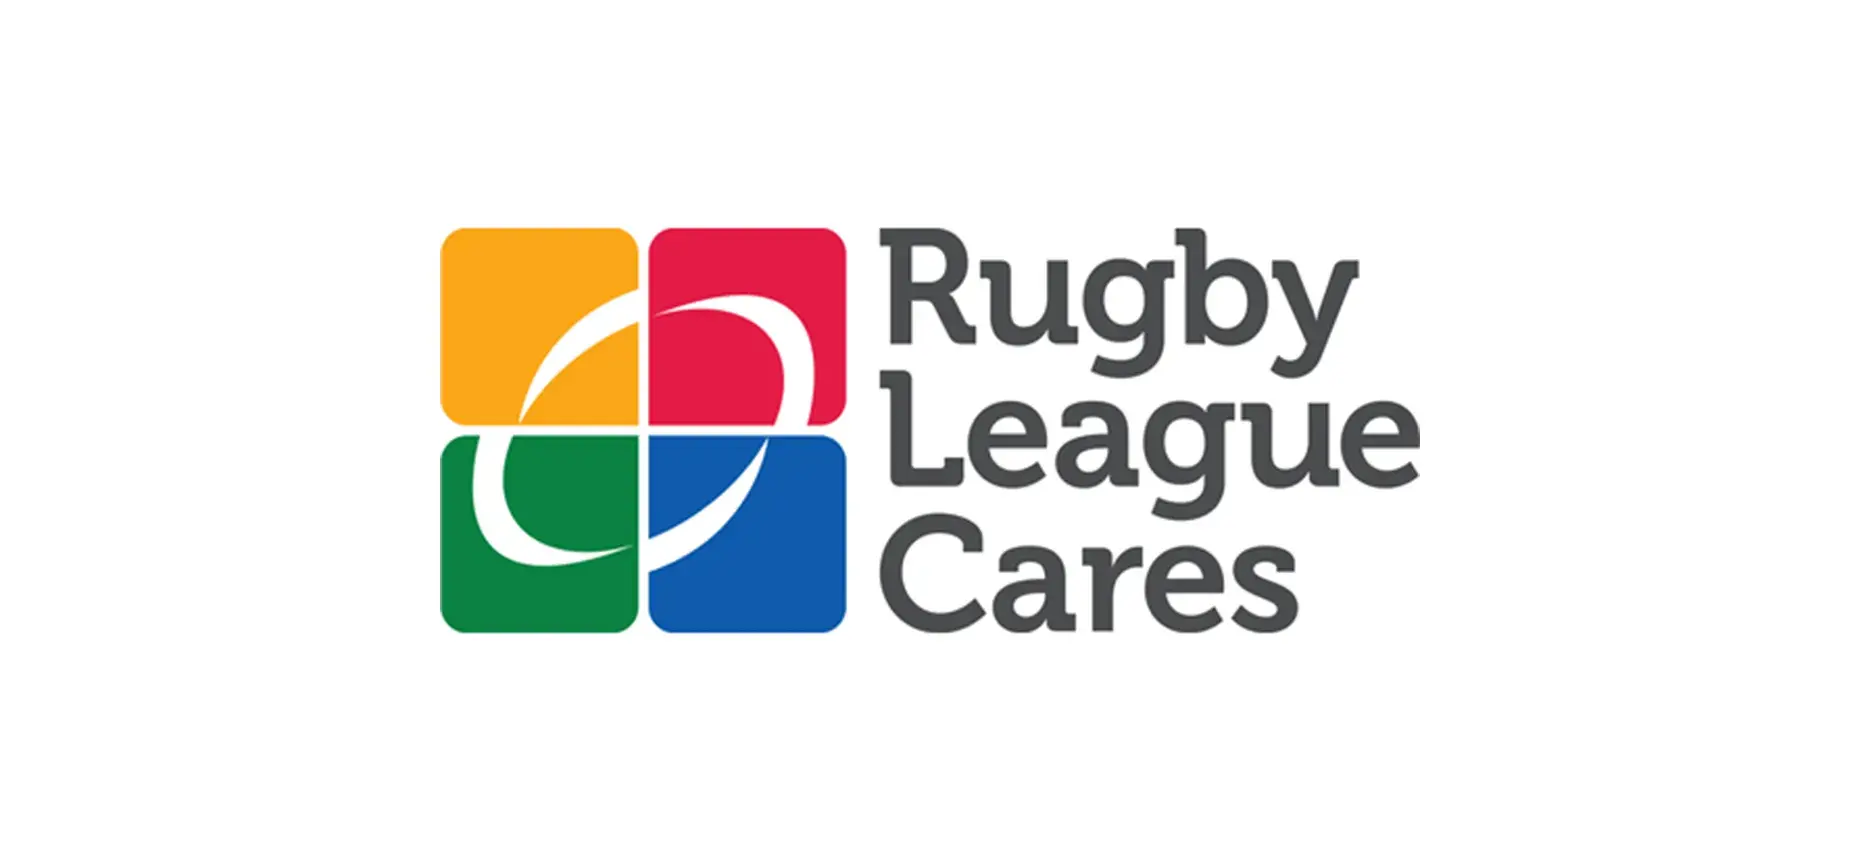 Rugby League Cares logo